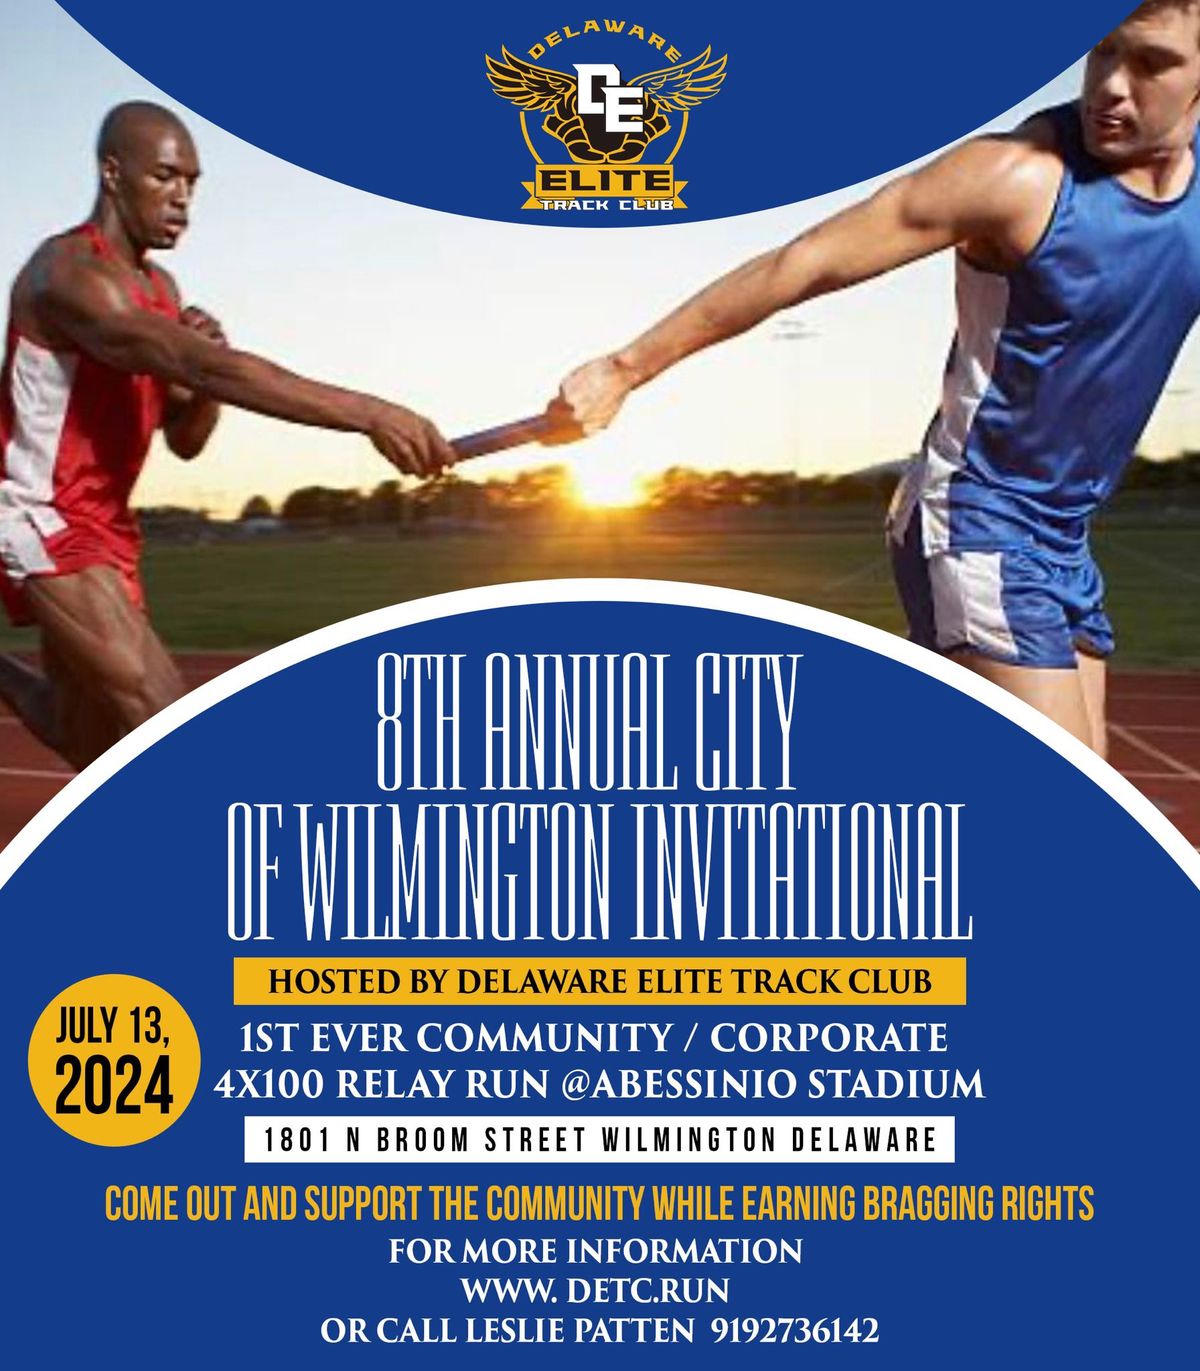 City of Wilmington invational meet hosted by Delaware Elite Track Club